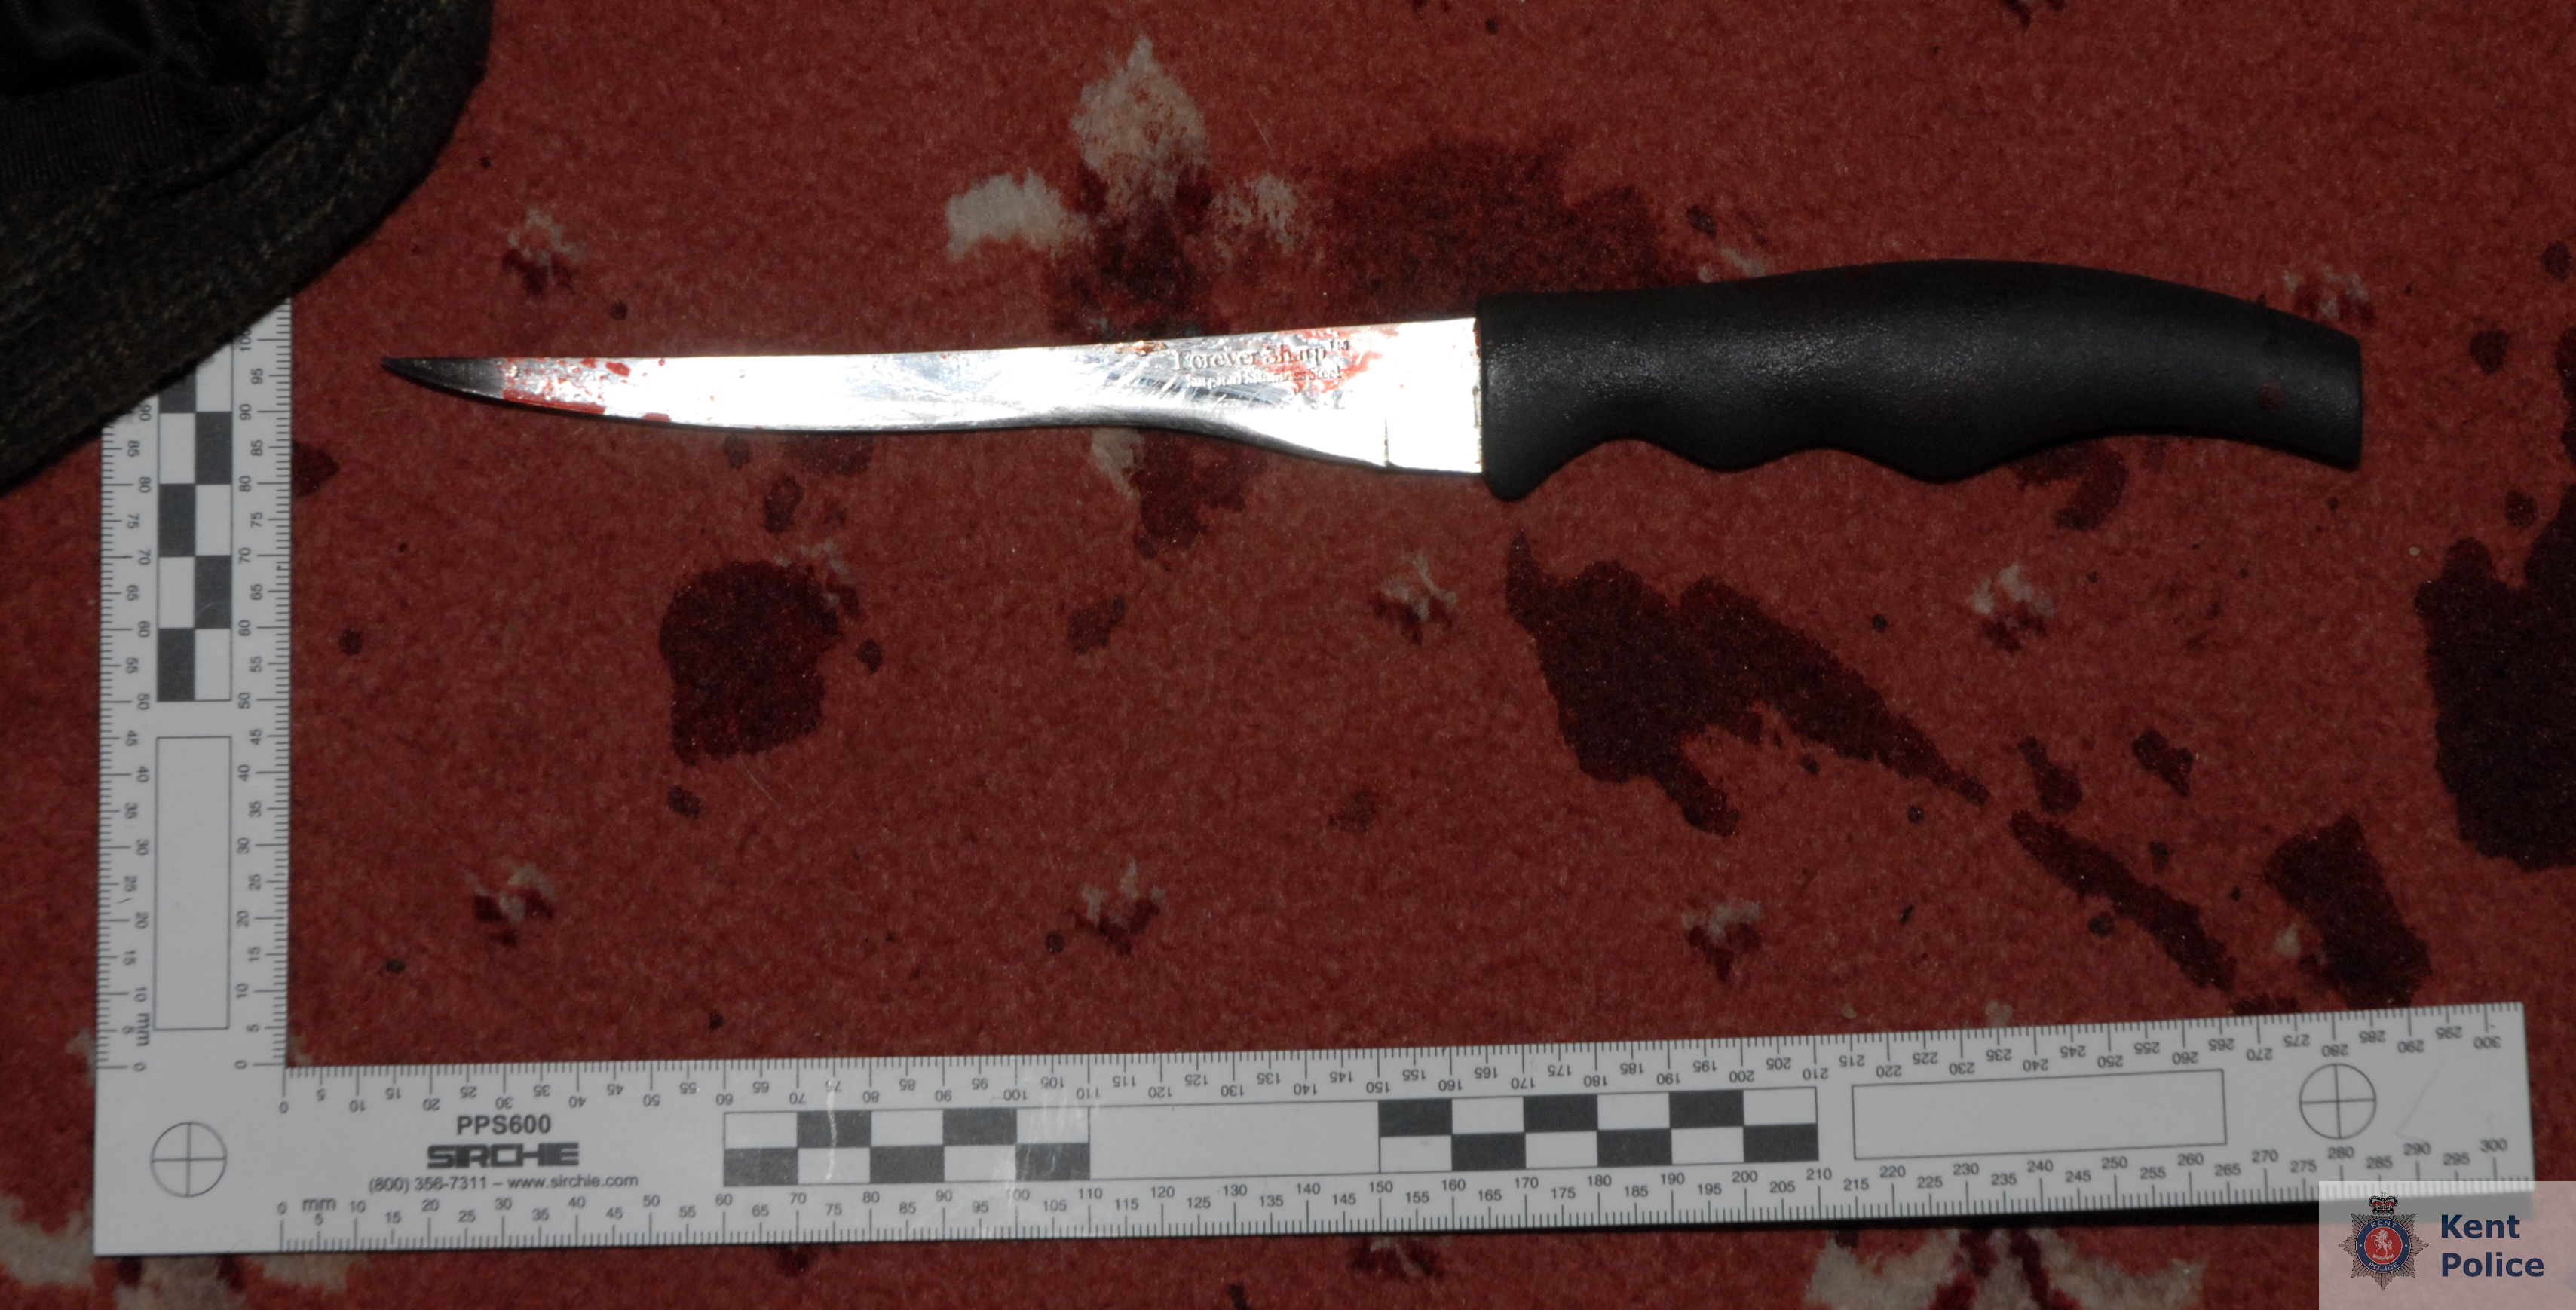 Fred Butcher also used this knife. Picture: Kent Police